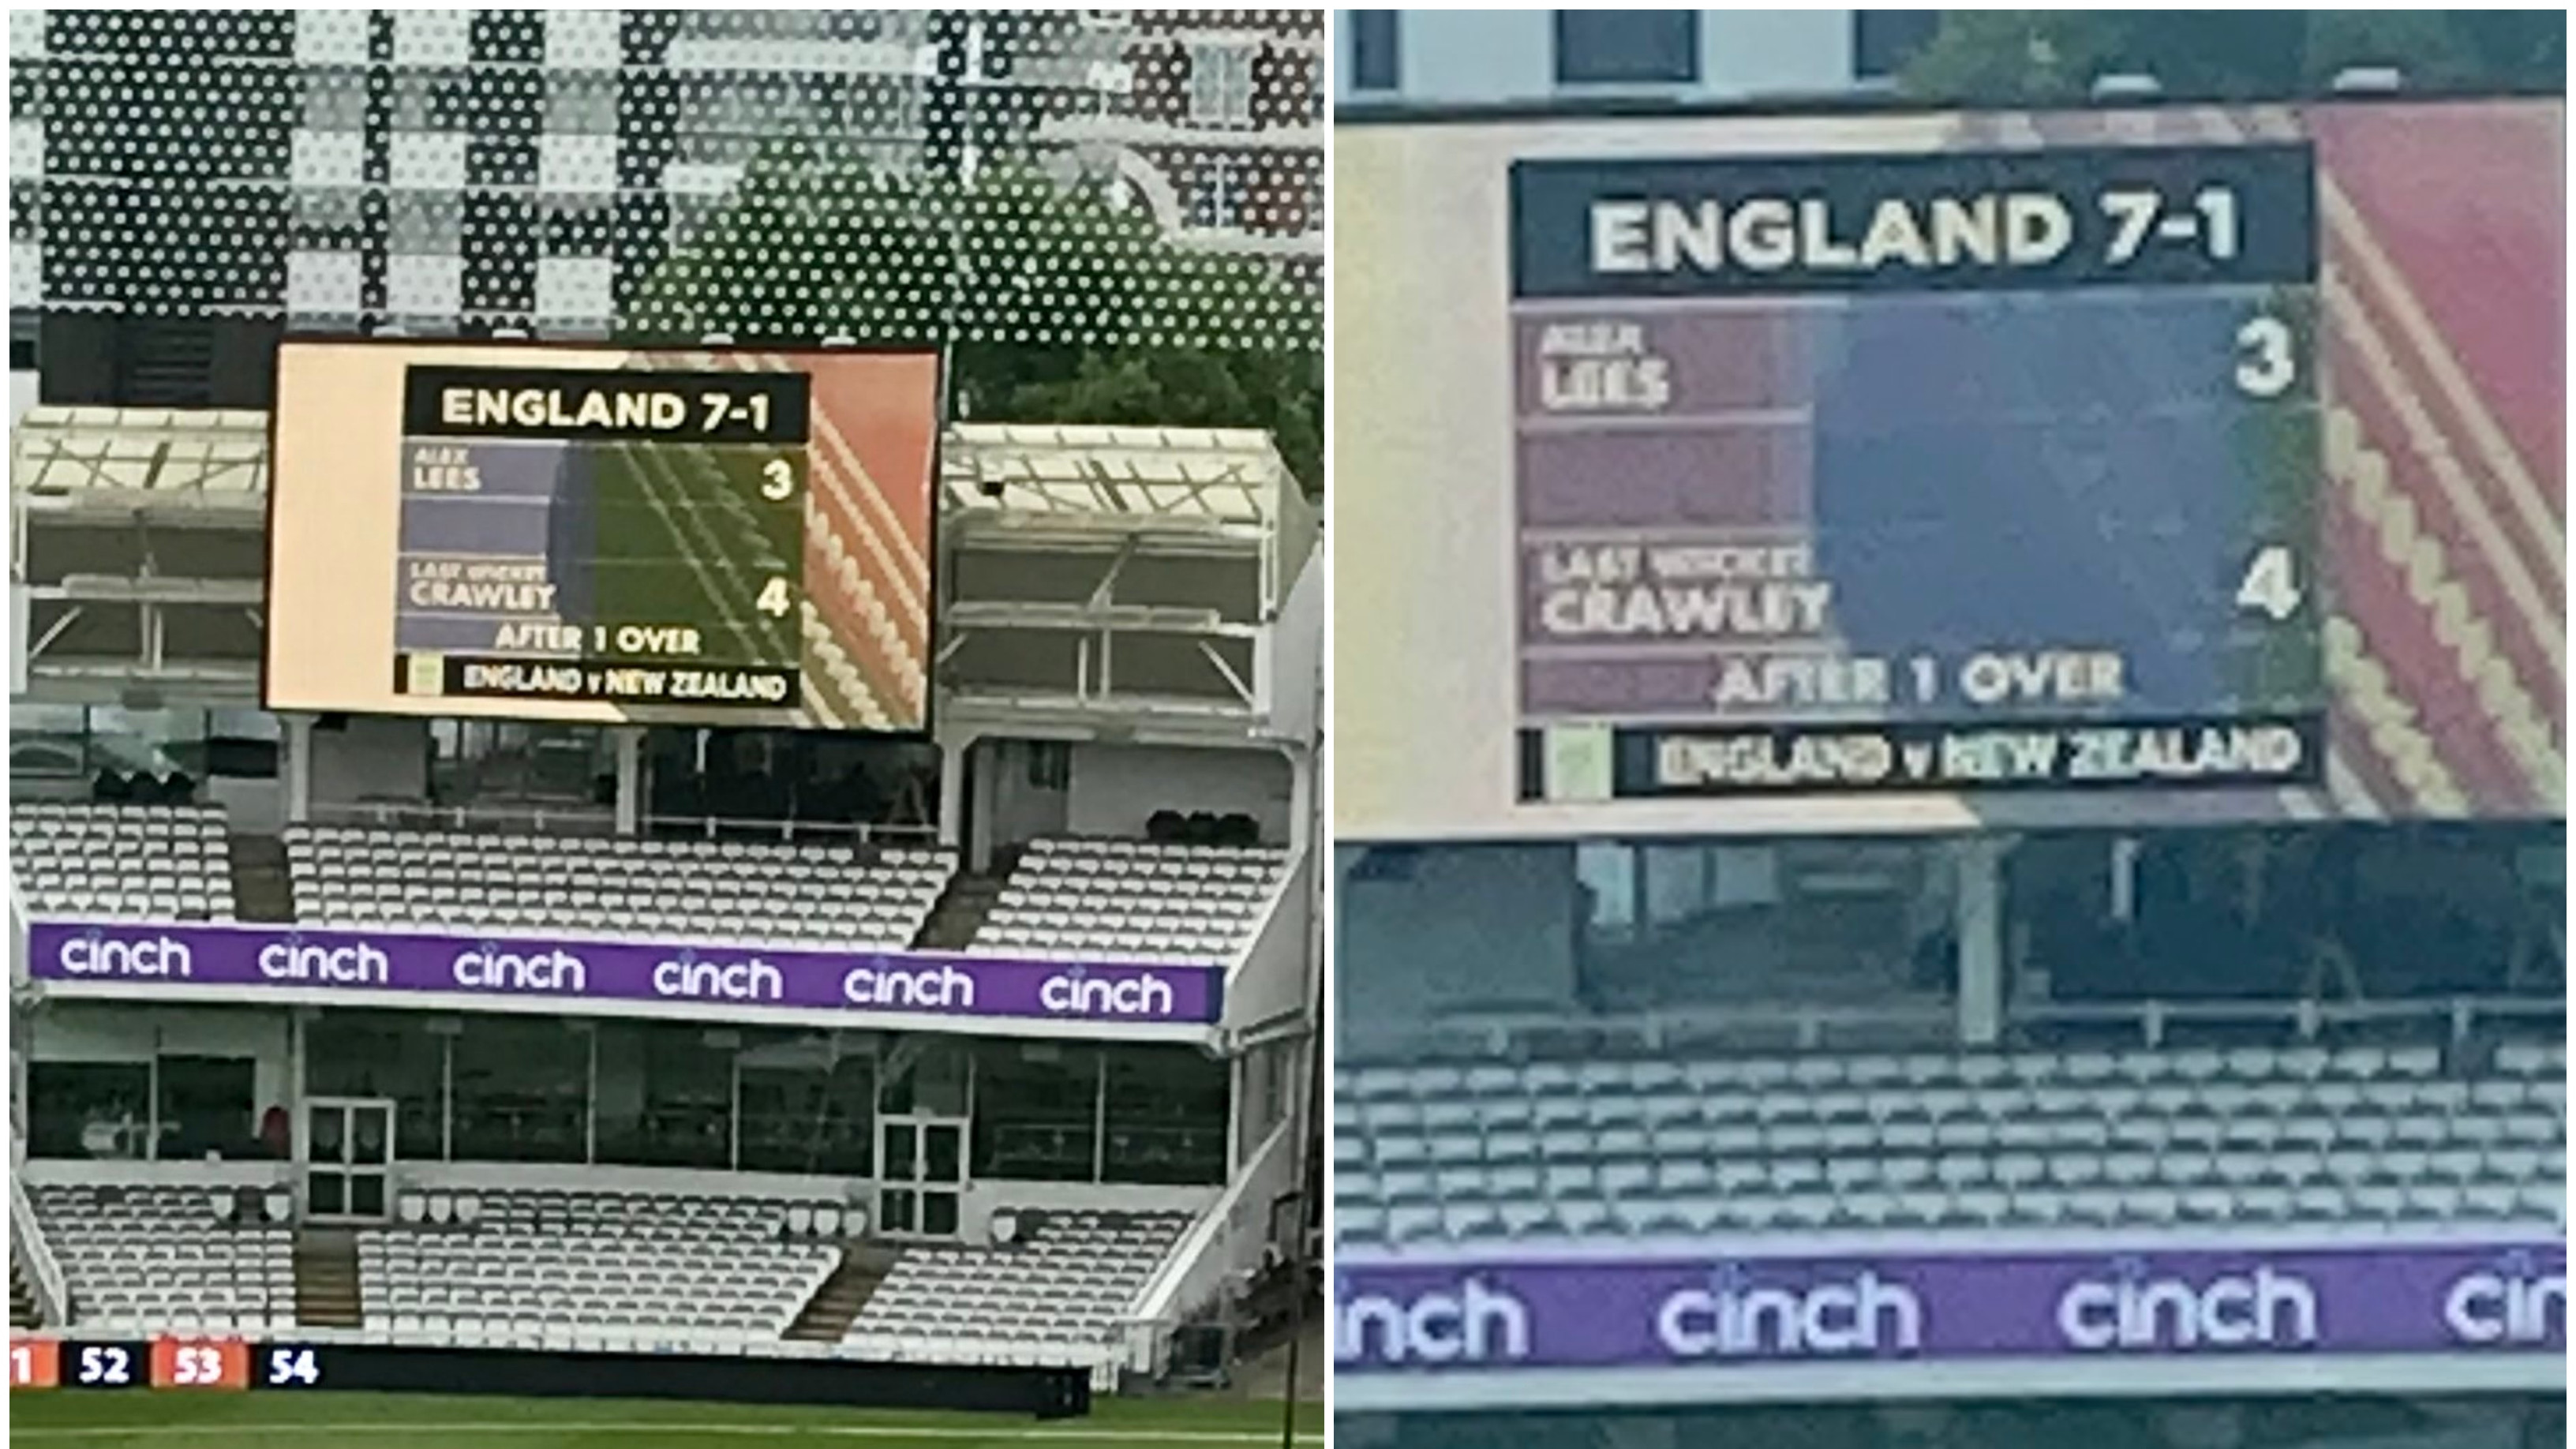 ENG v NZ 2022: Twitterati react as Lord's scorecard shows England at 7/1 ahead of first day’s action